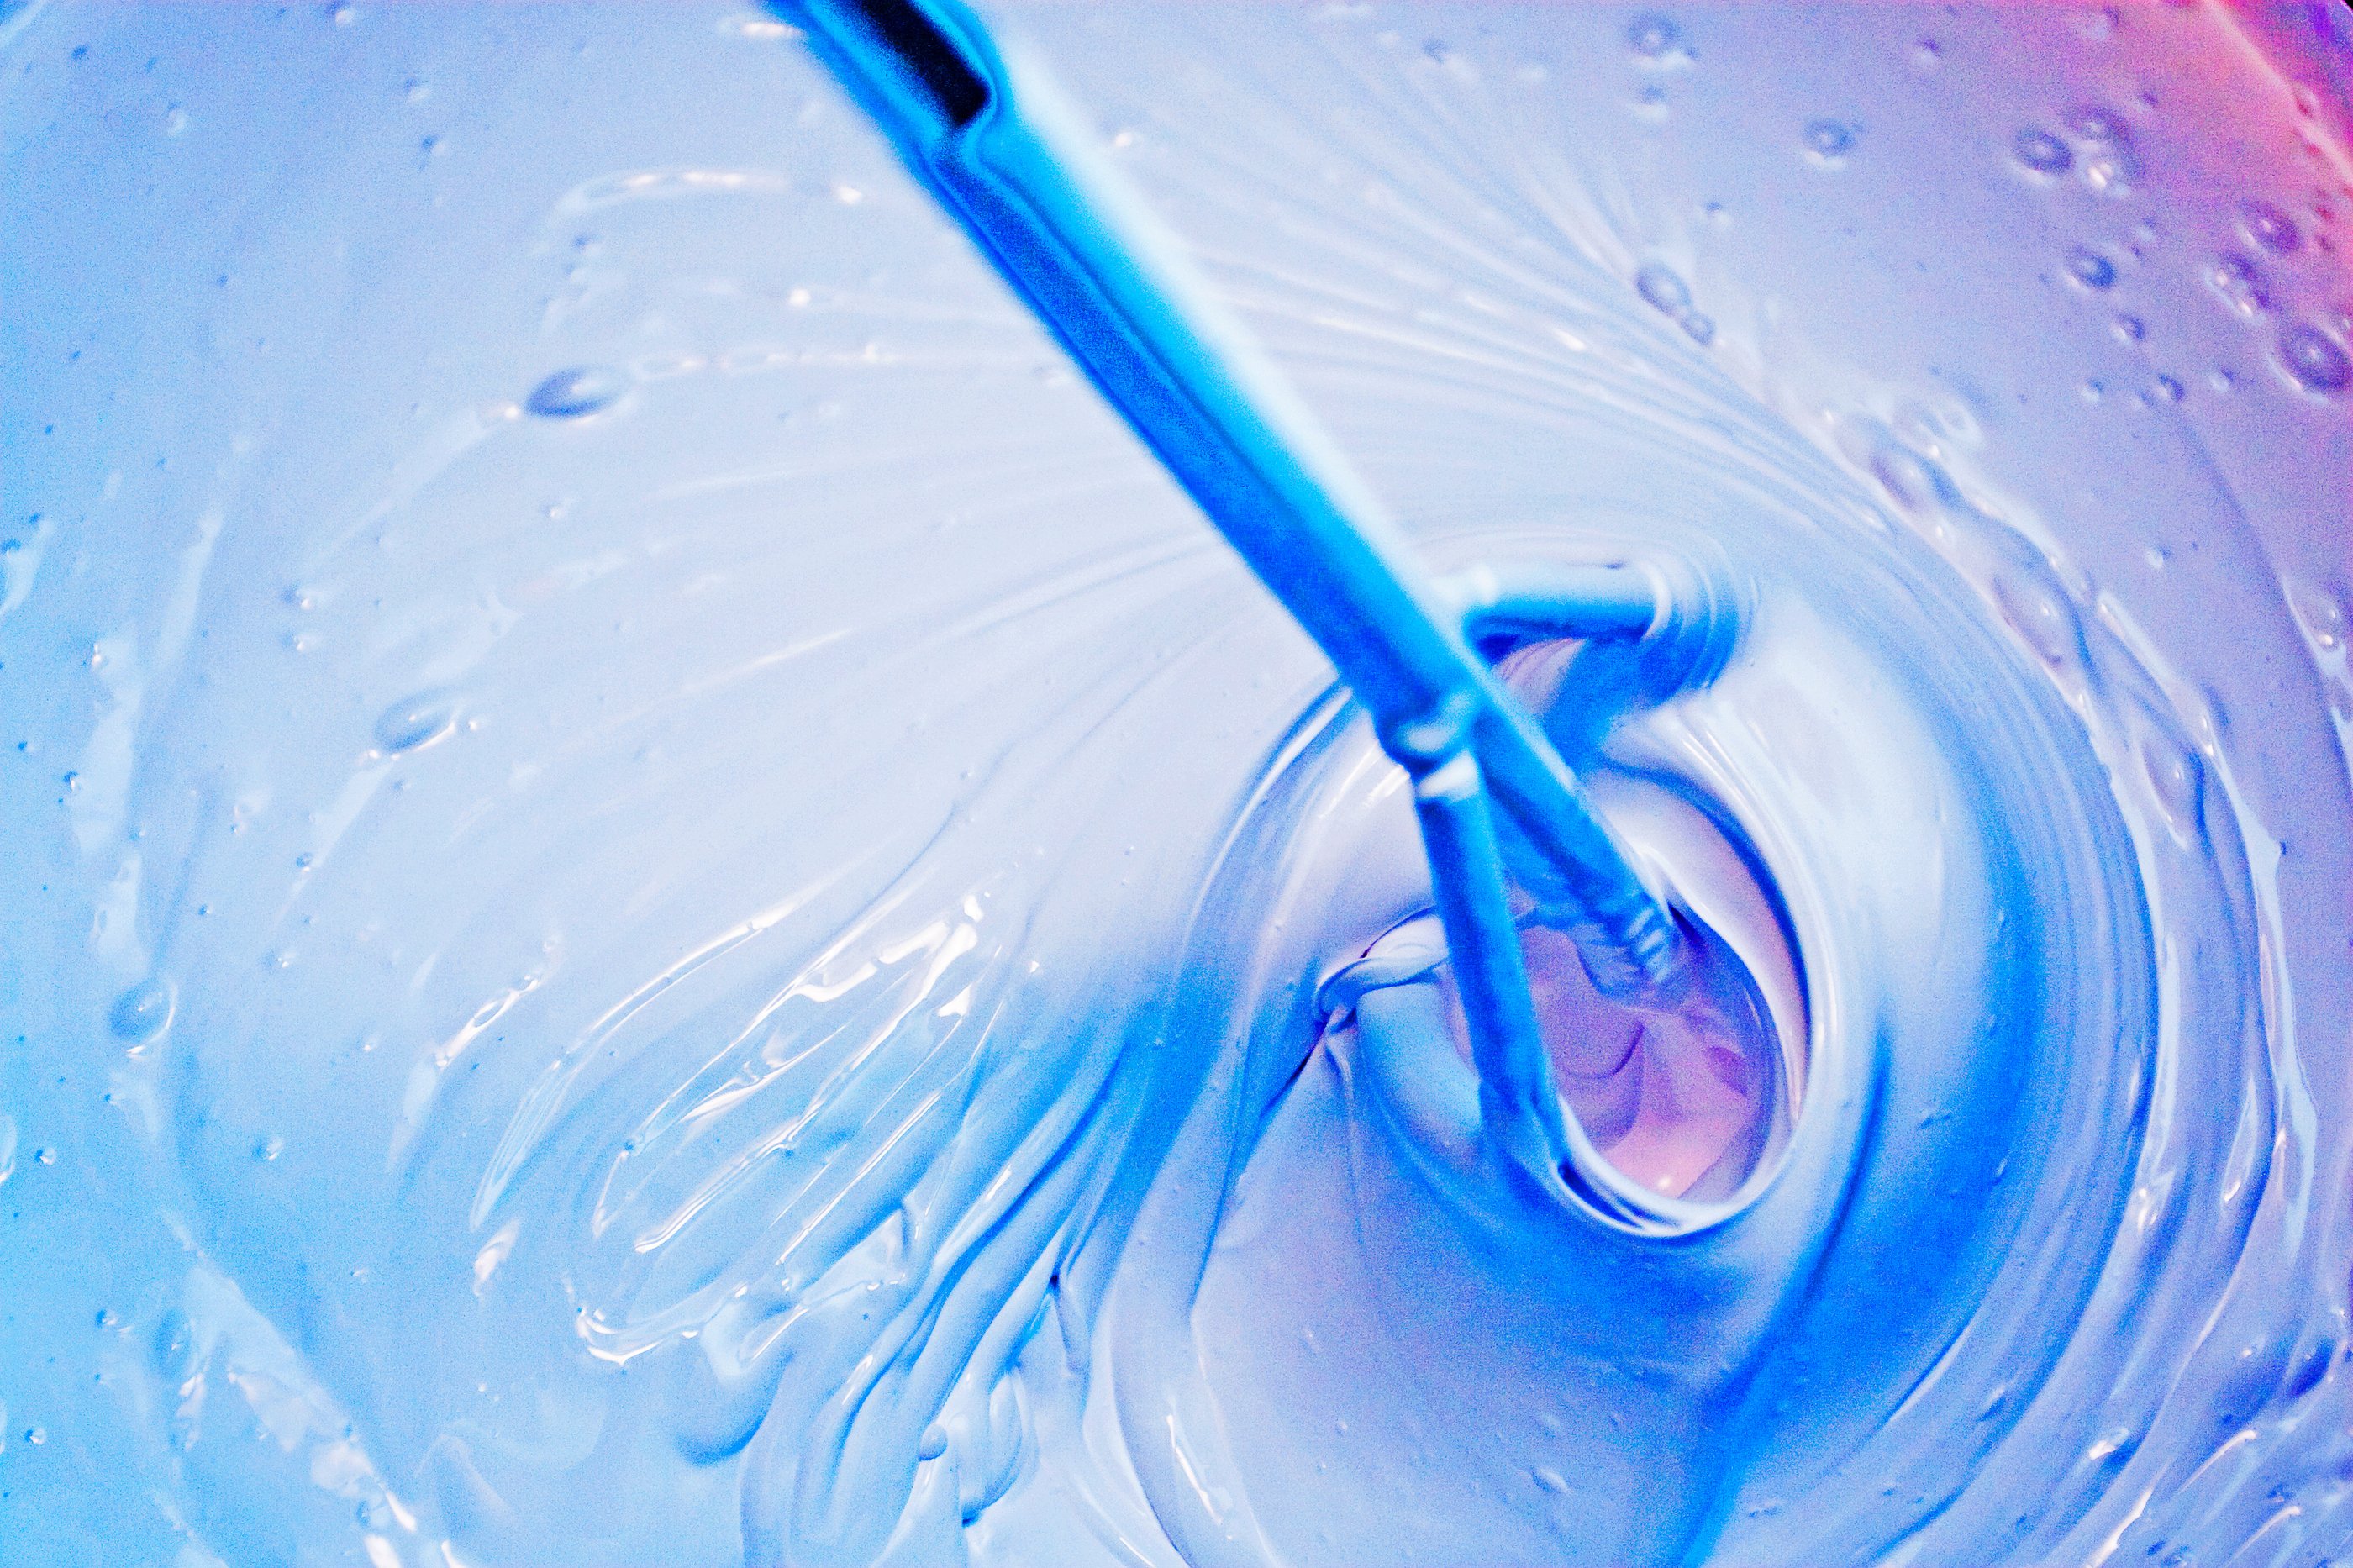 Paint mixer is being used in a large amount of blue paint to mix pingments in